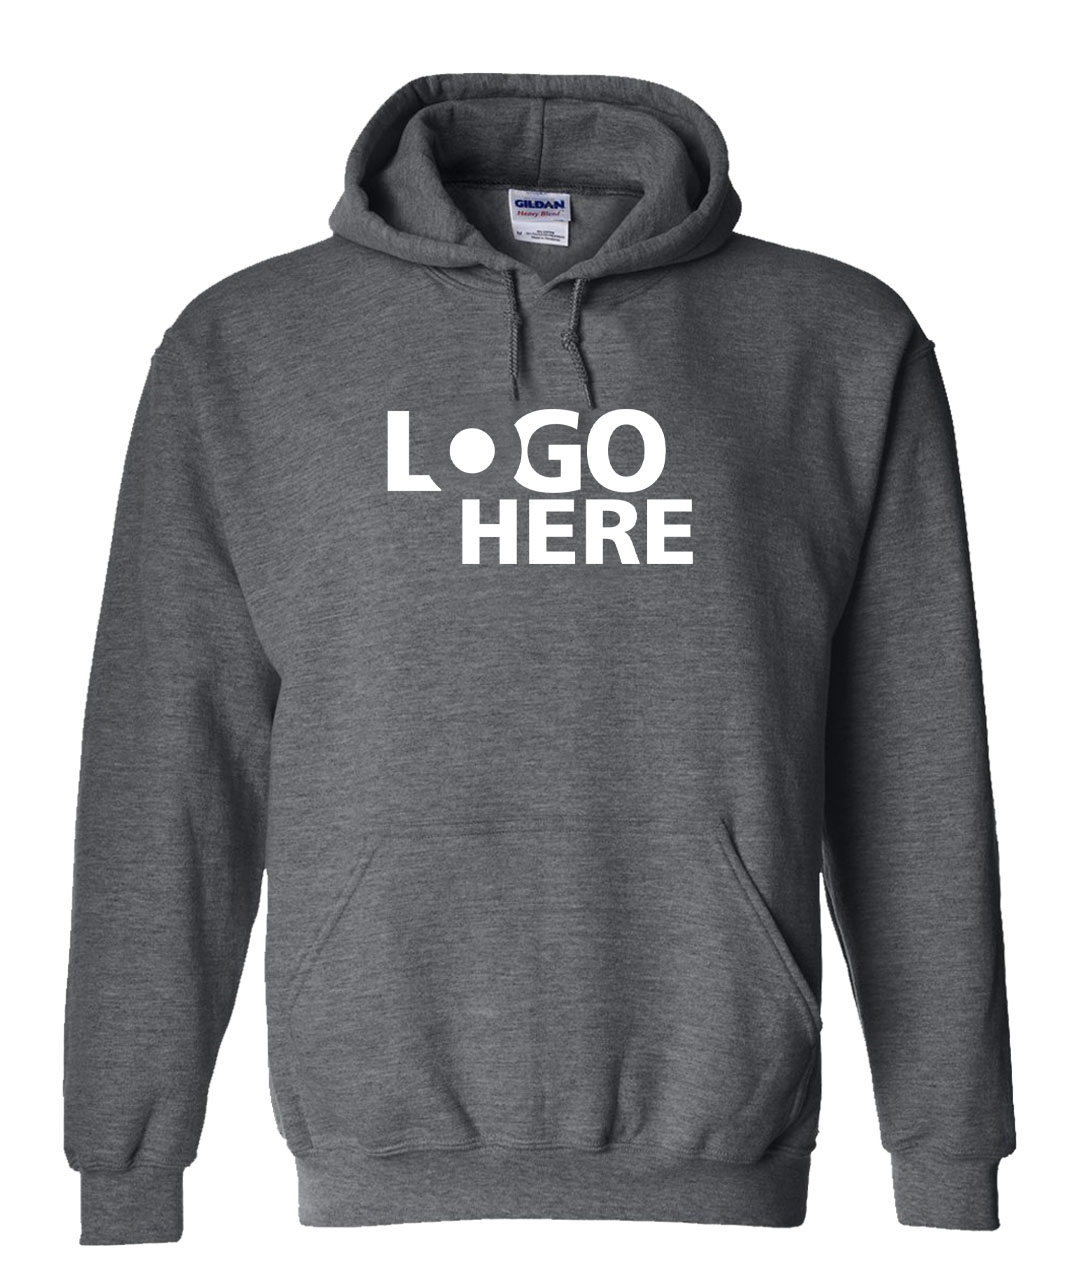 Custom Unisex Zip-Up Hoodie Printing and Embroidery in Vancouver BC